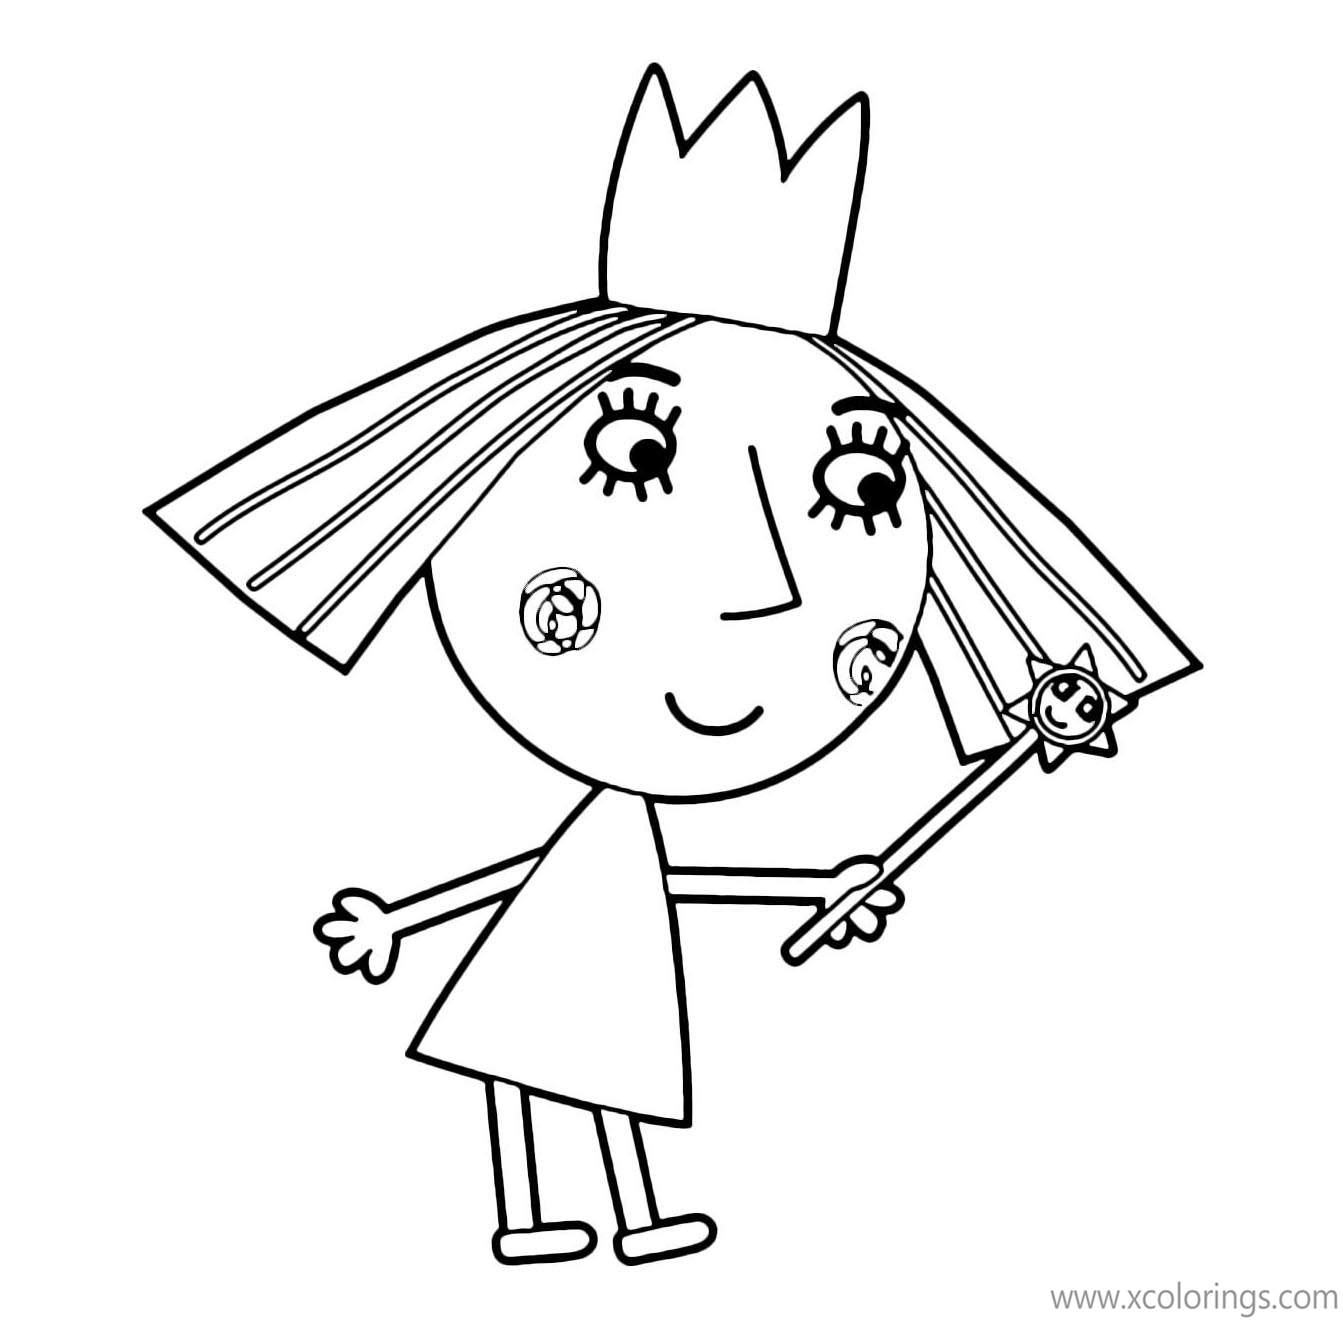 Free Ben And Holly Coloring Pages Princess Holly with Magic Stick printable